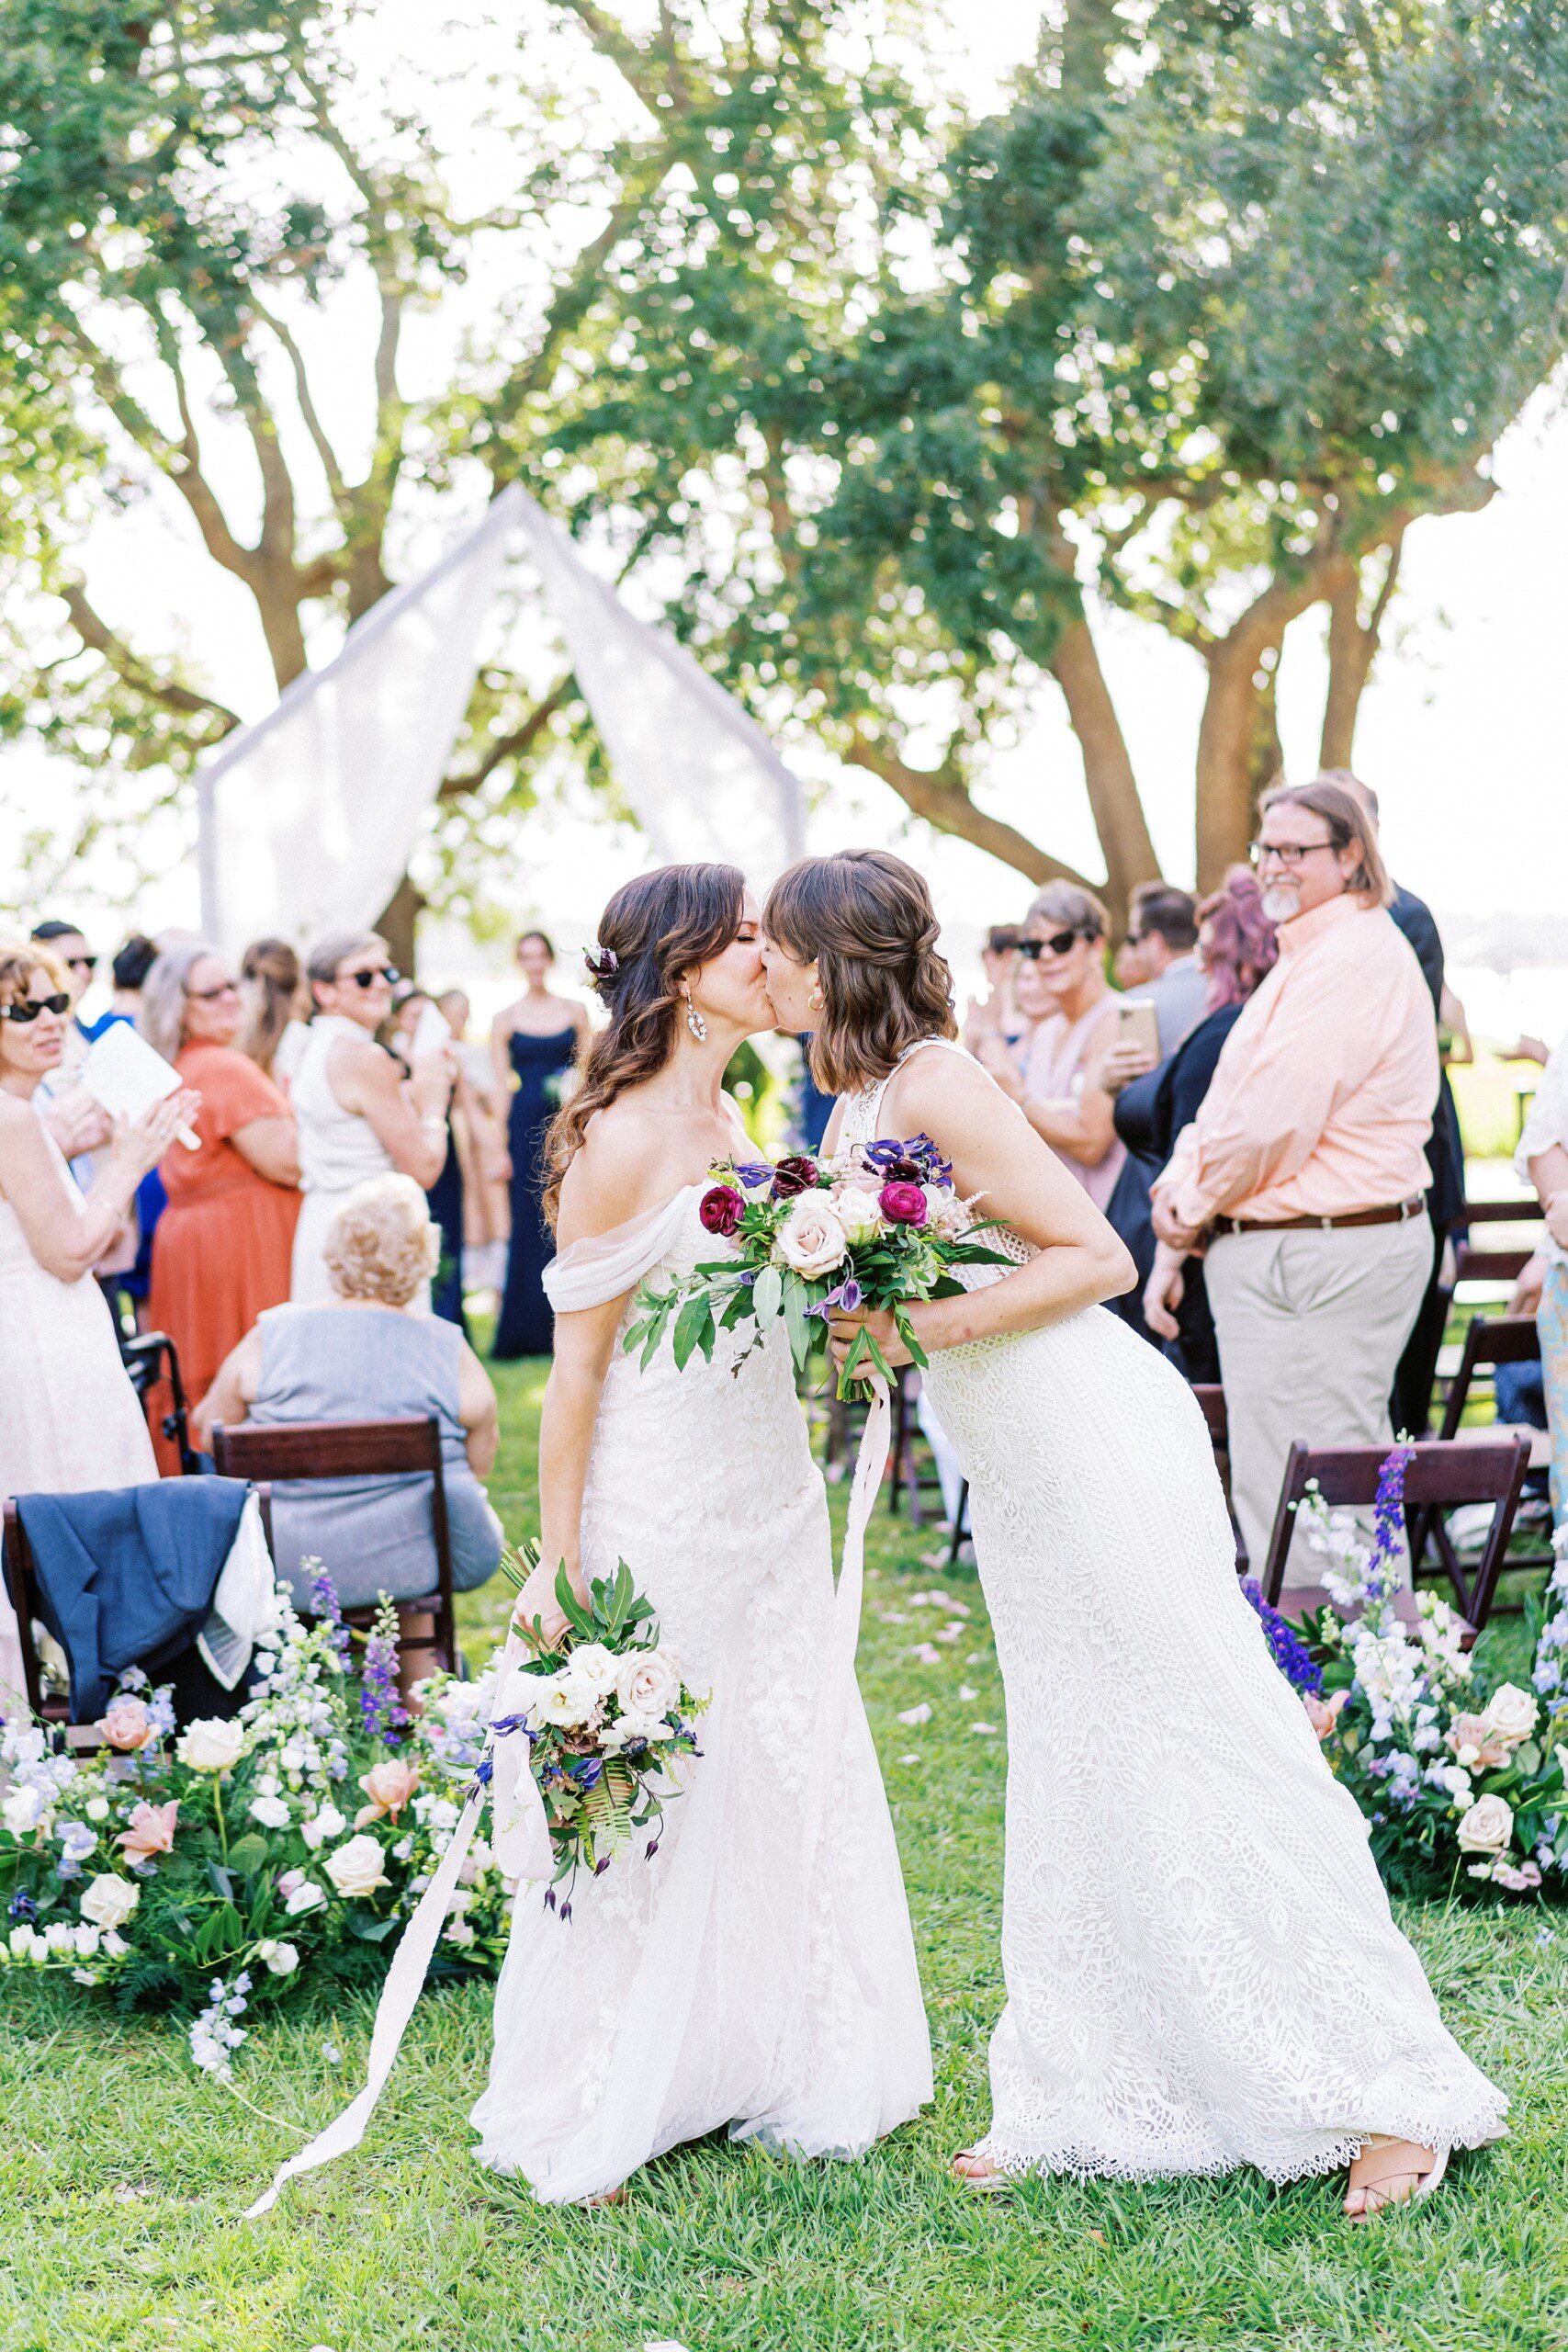 candid moment of two stylish brides kissing at the end of the ceremony aisle as guests look on at their wedding on the front lawn of Lowndes Grove in Charleston SC